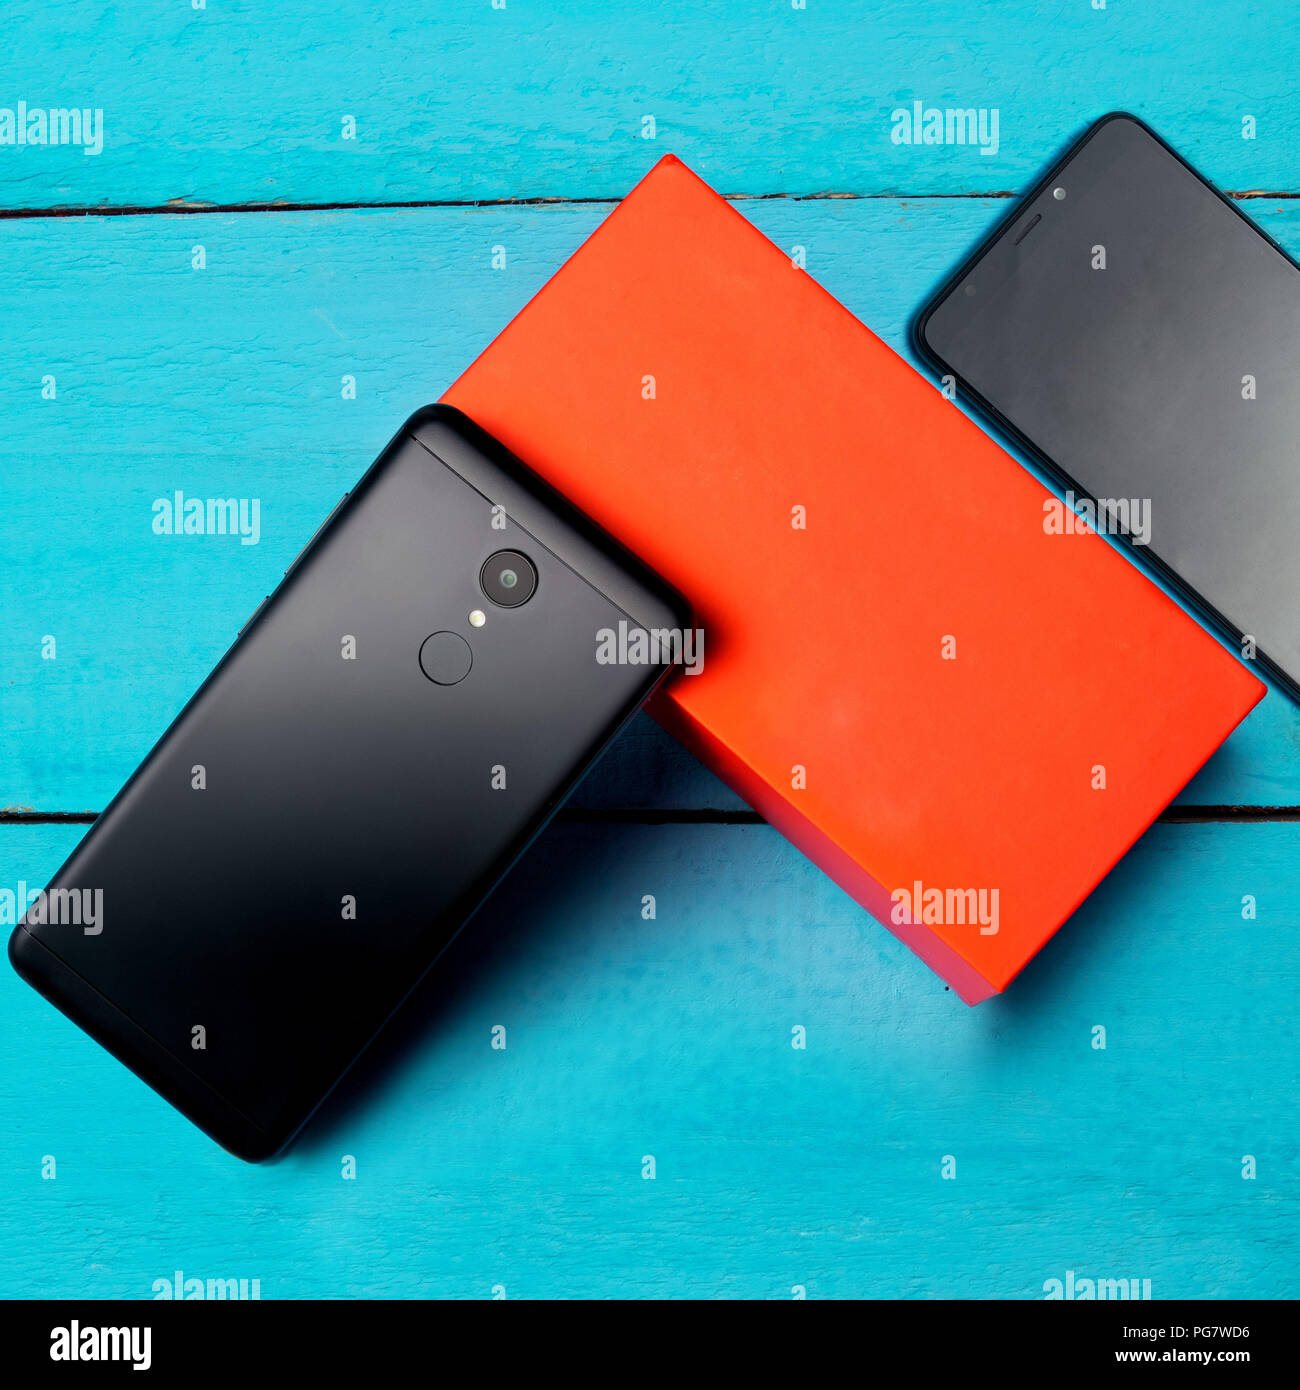 Two smartphones on top of a wooden board, blue background and orange box Stock Photo